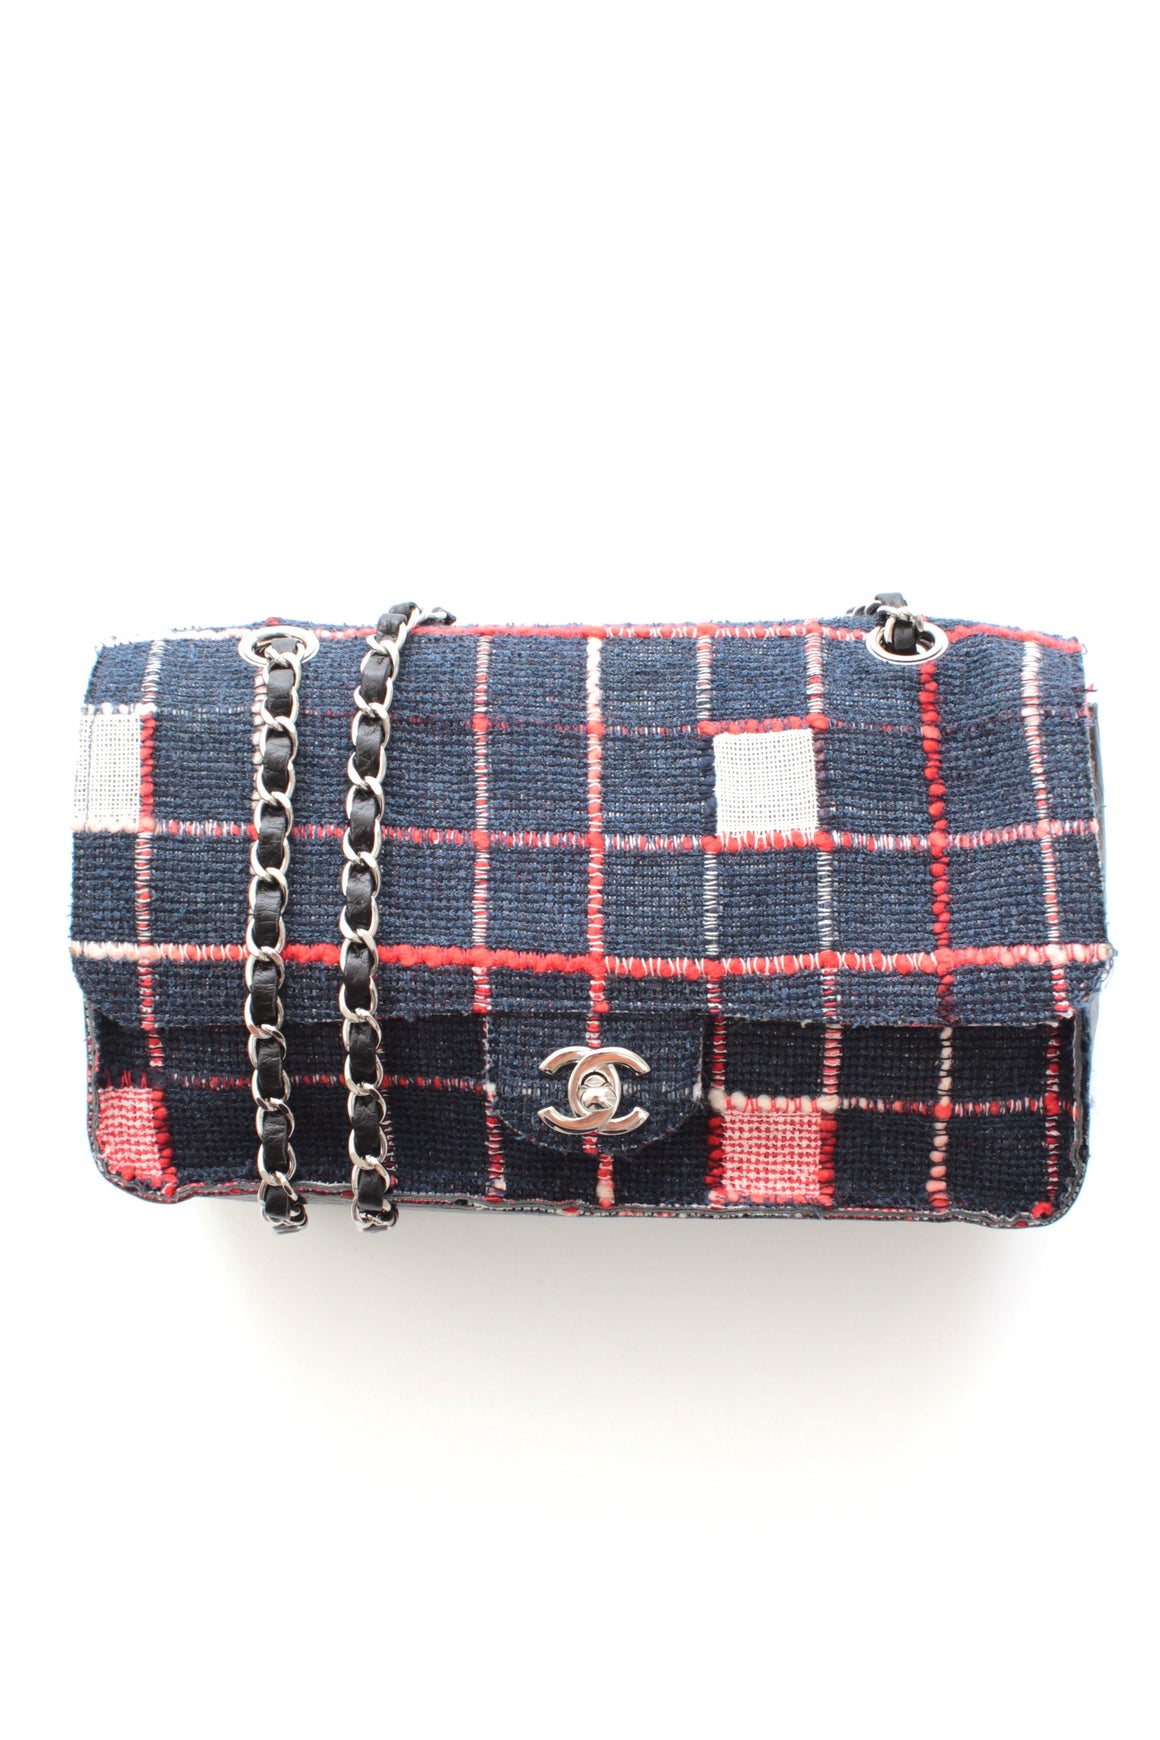 Chanel Limited Edition Woven Check and Leather Flap Bag (A66257)